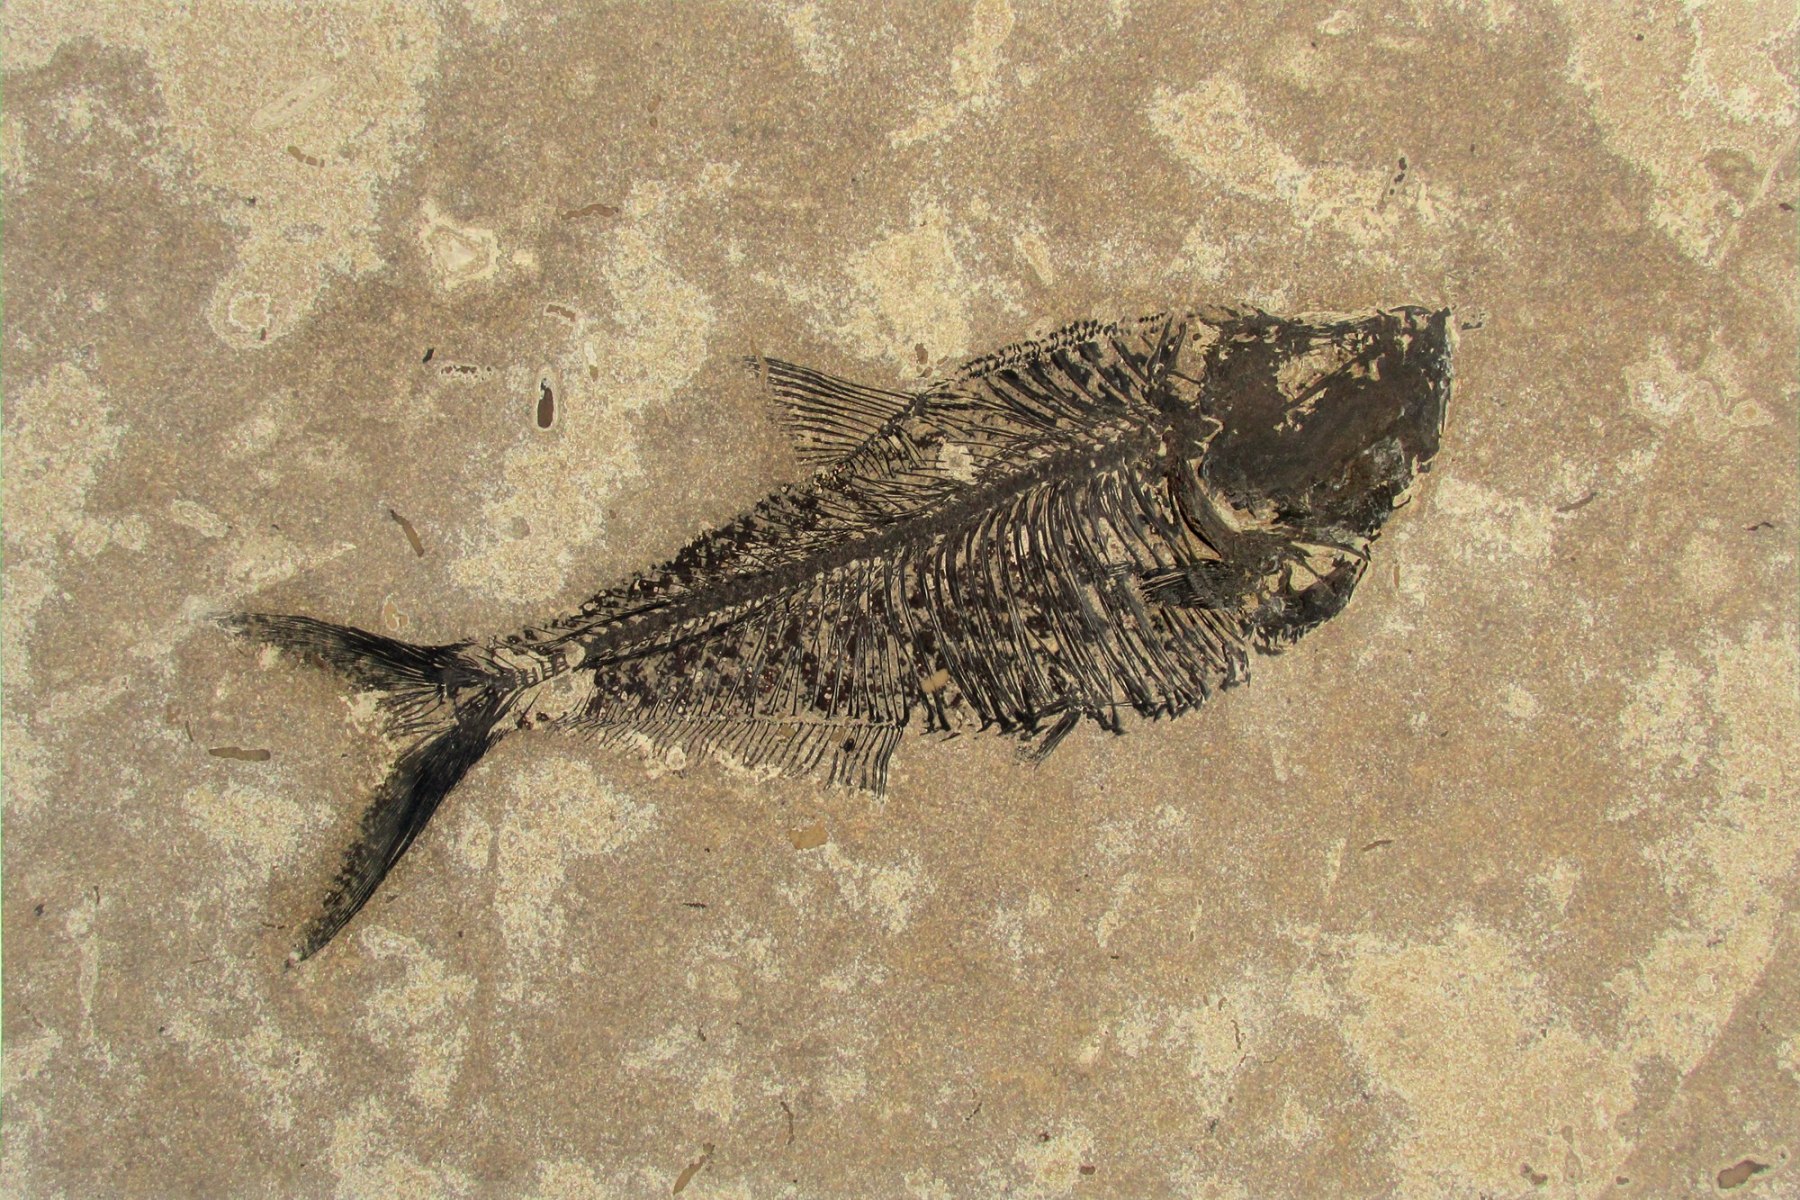 A 16" x 24" Fossil Fish Tile containing a large Diplomystus fossil